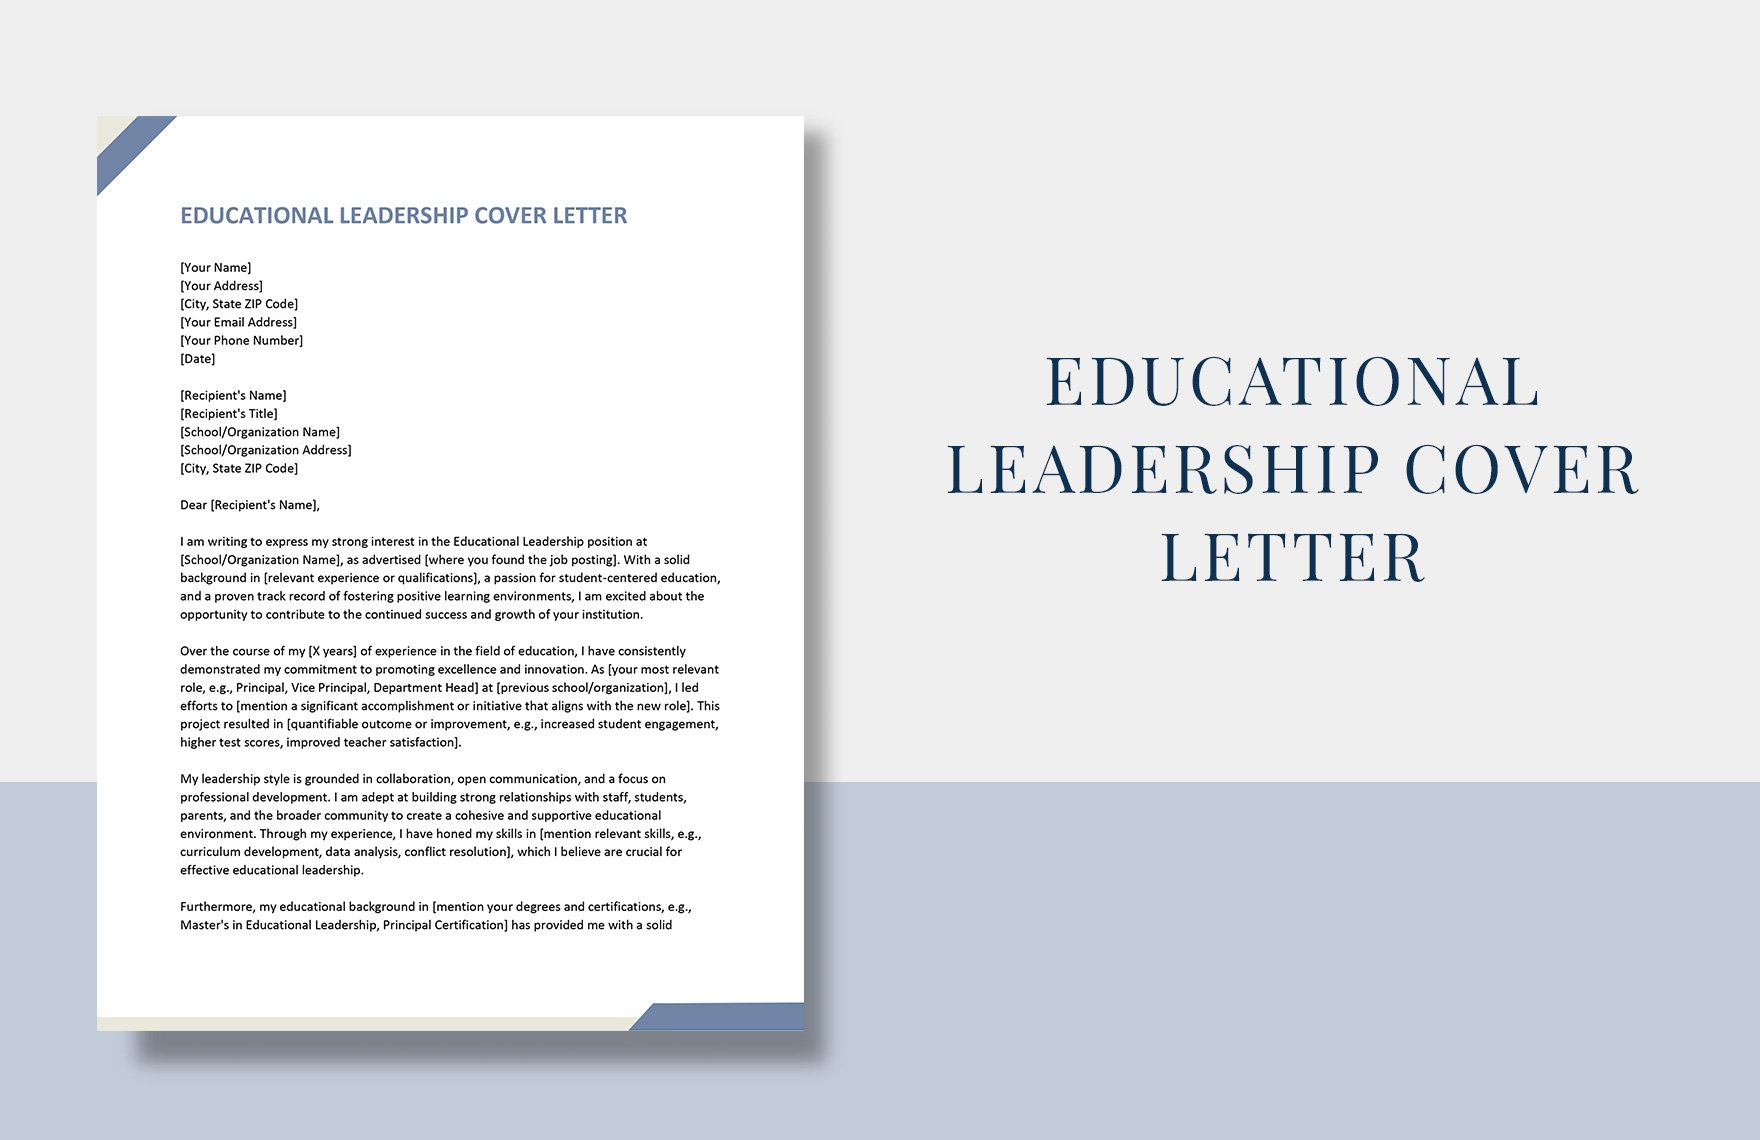 Educational Leadership Cover Letter in Word, Google Docs, Apple Pages